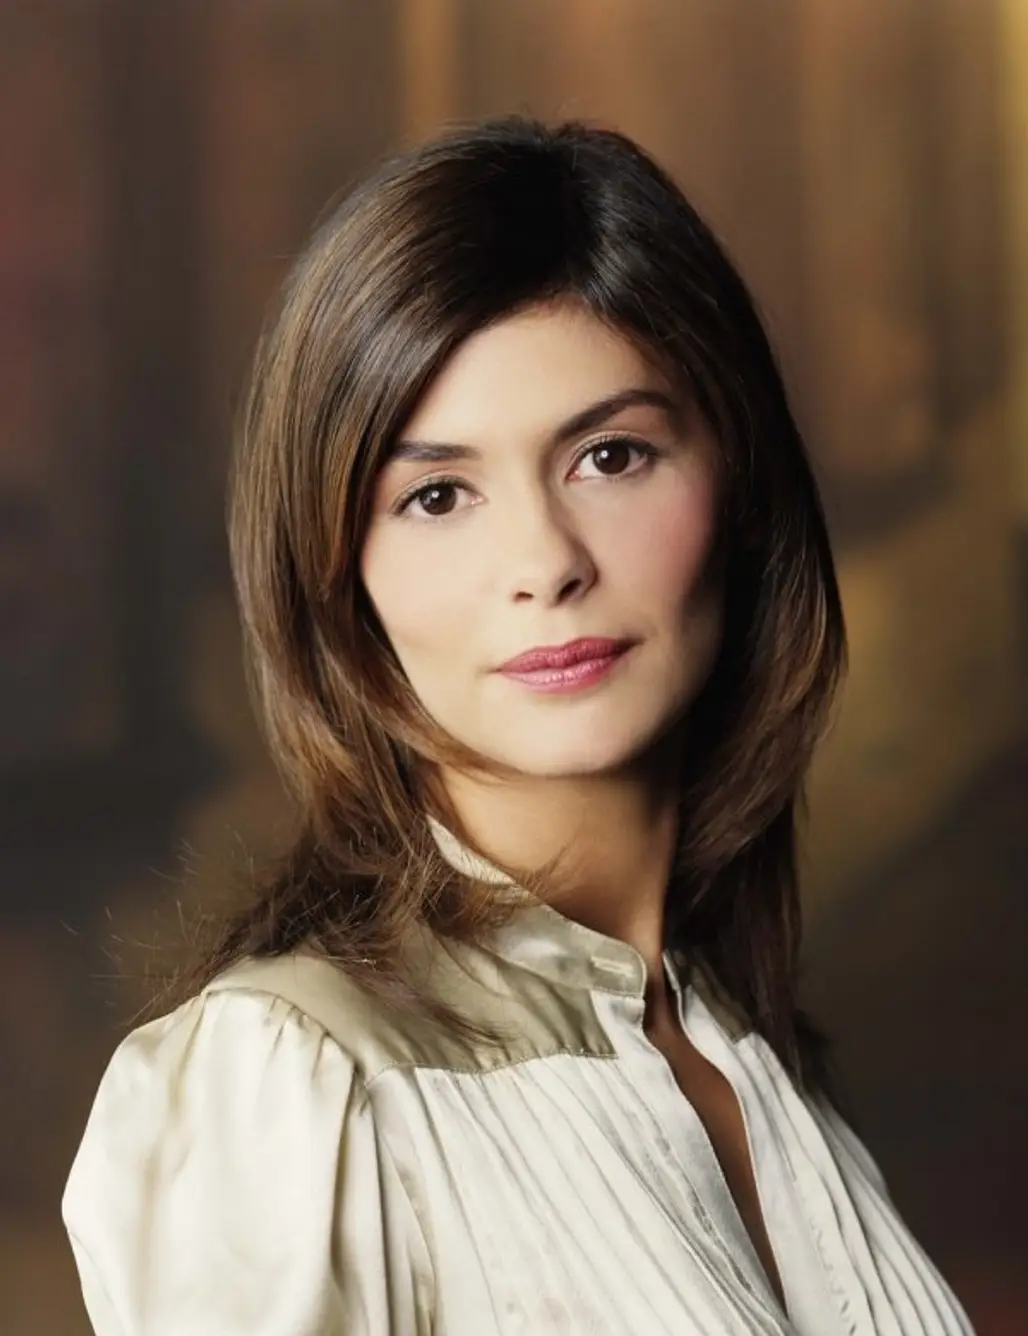 Audrey Tautou as Coco Chanel